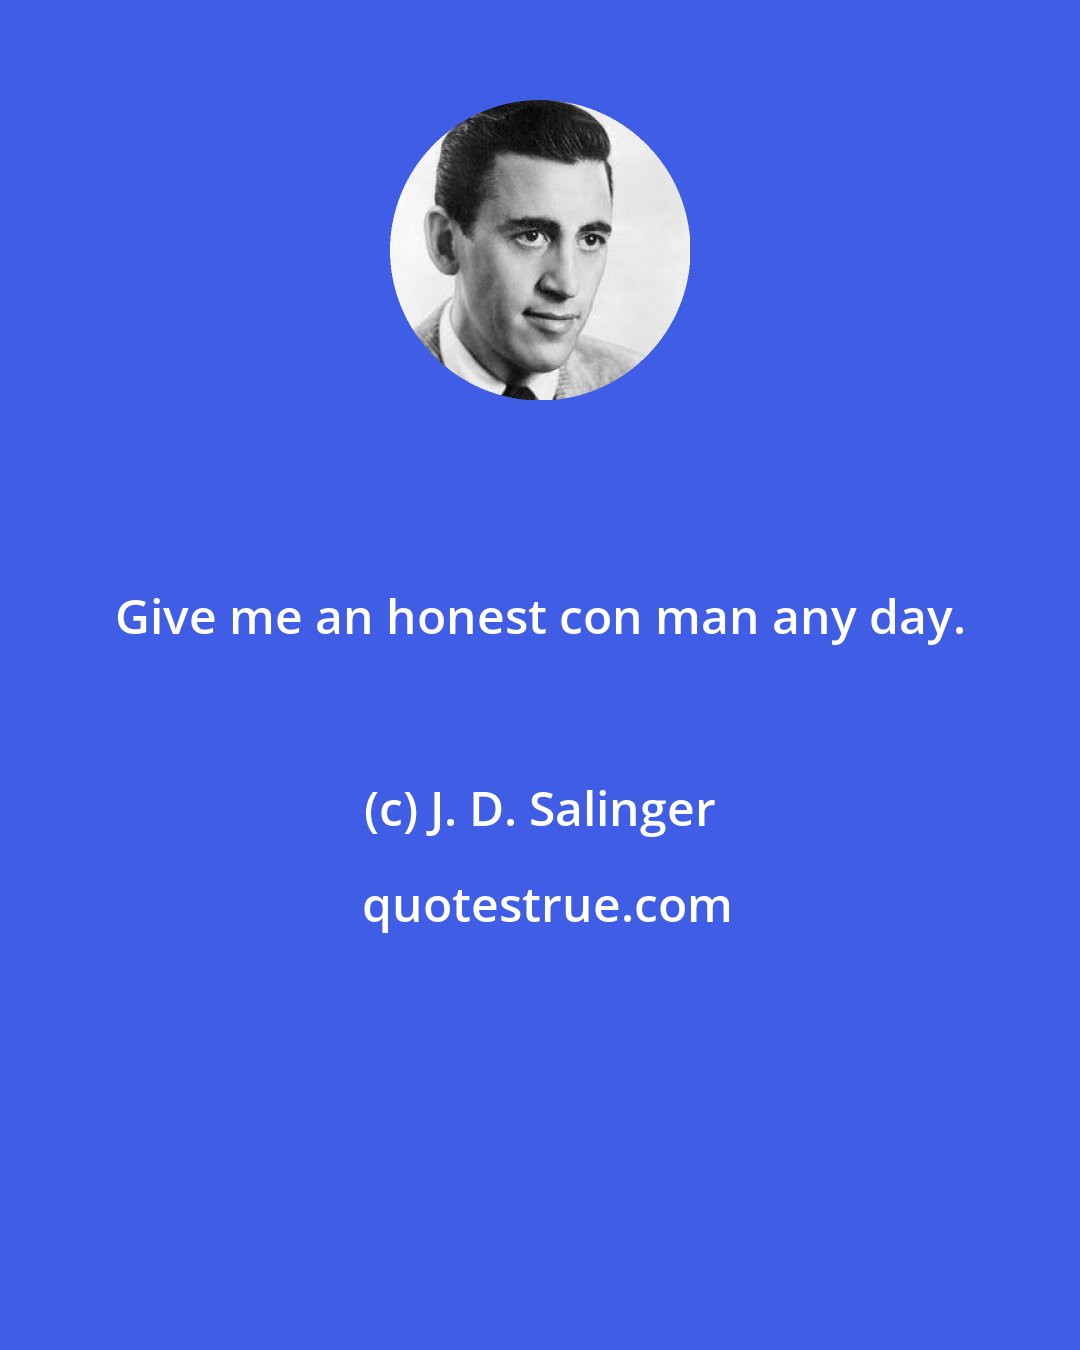 J. D. Salinger: Give me an honest con man any day.